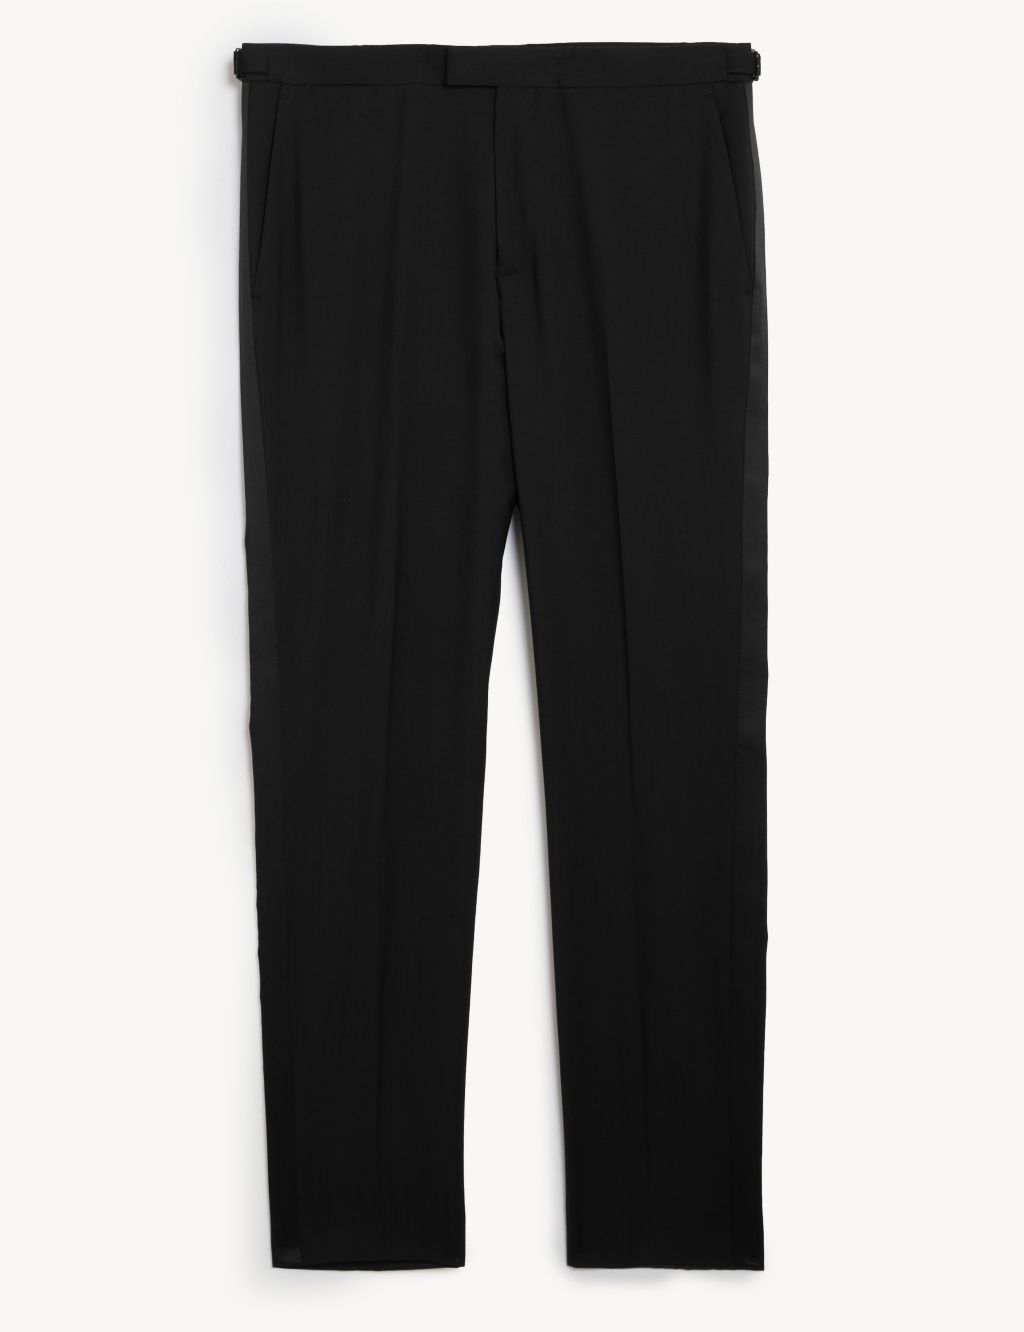 Slim Fit Pure Wool Tuxedo Trousers image 2